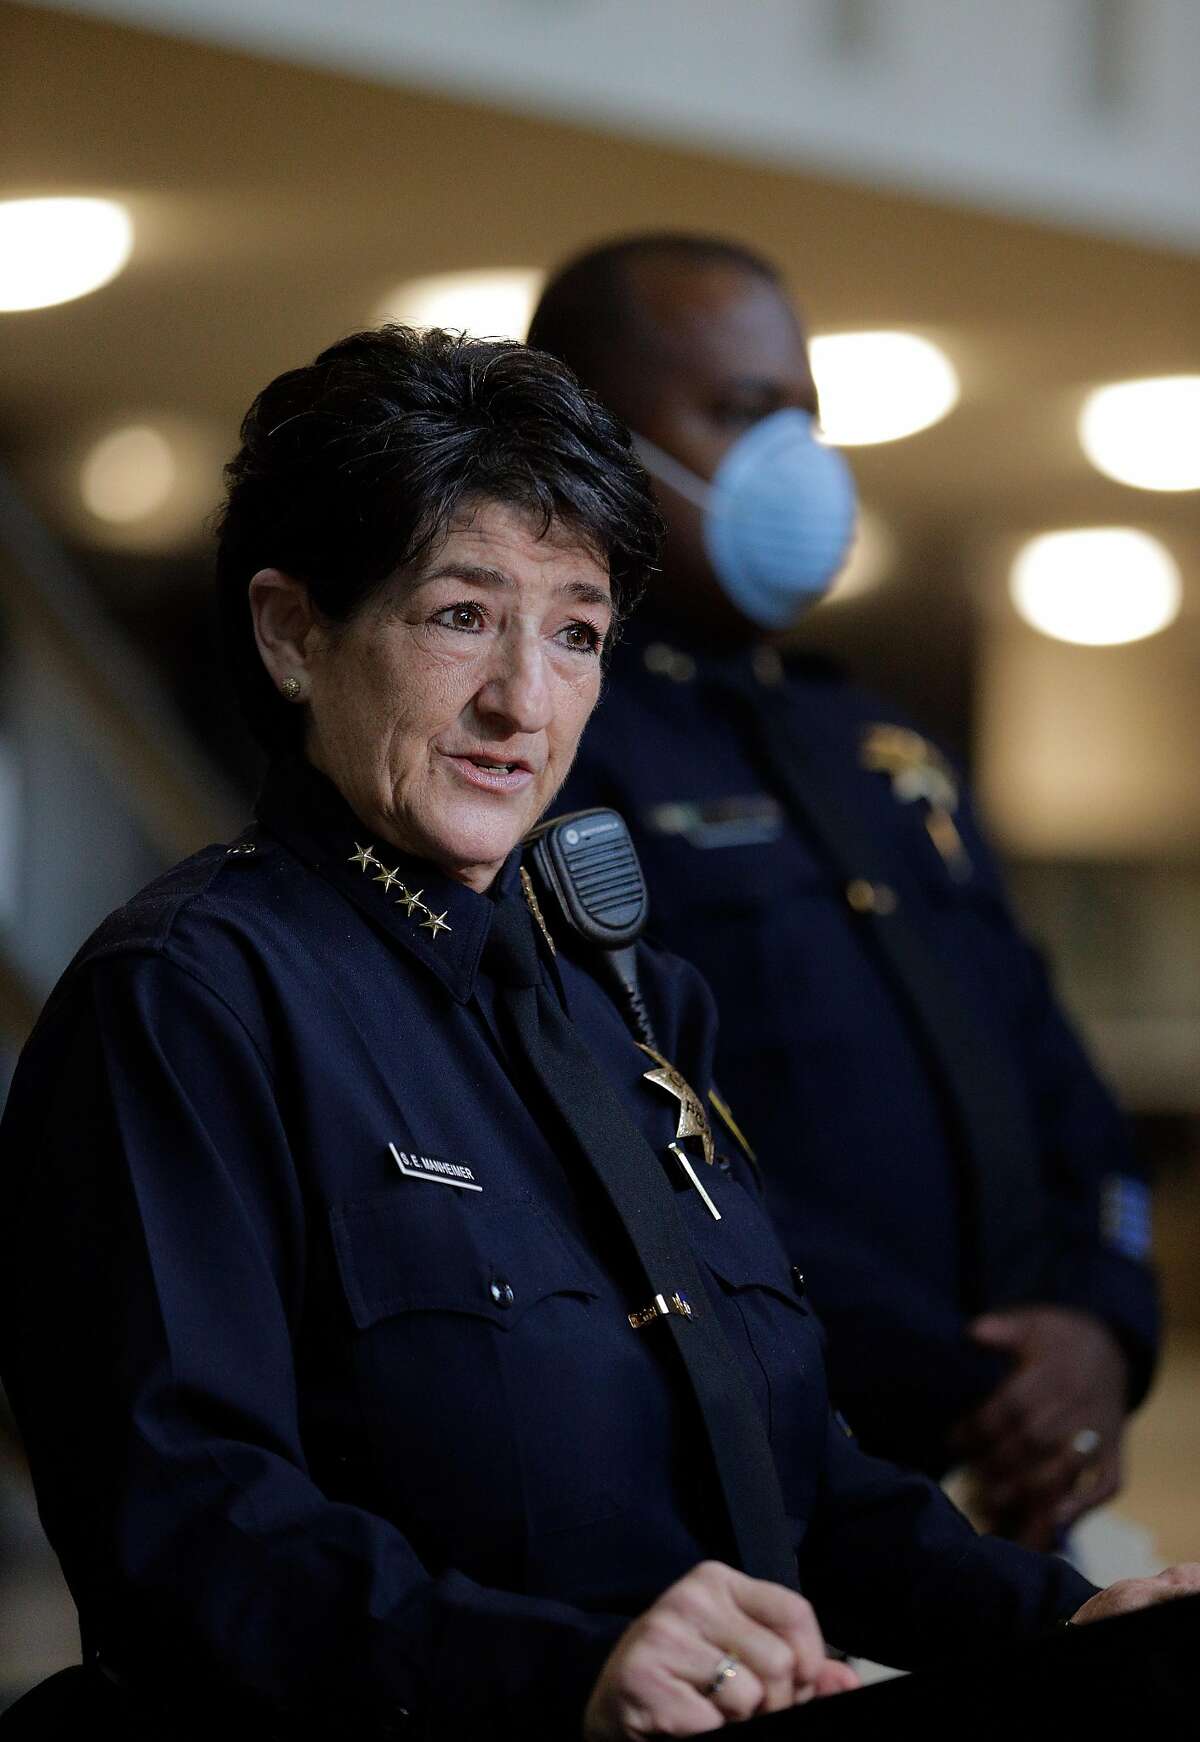 Interim Oakland Police Chief, Susan Manheimer discusses police actions during protests as demonstrators took to the streets for the fifth straight day in the Bay Area in peaceful solidarity against nationwide police brutality and killing of black people in Oakland, Calif., on Wednesday, June 3, 2020. The killing of George Floyd set off a series of protests against police that have spread worldwide.